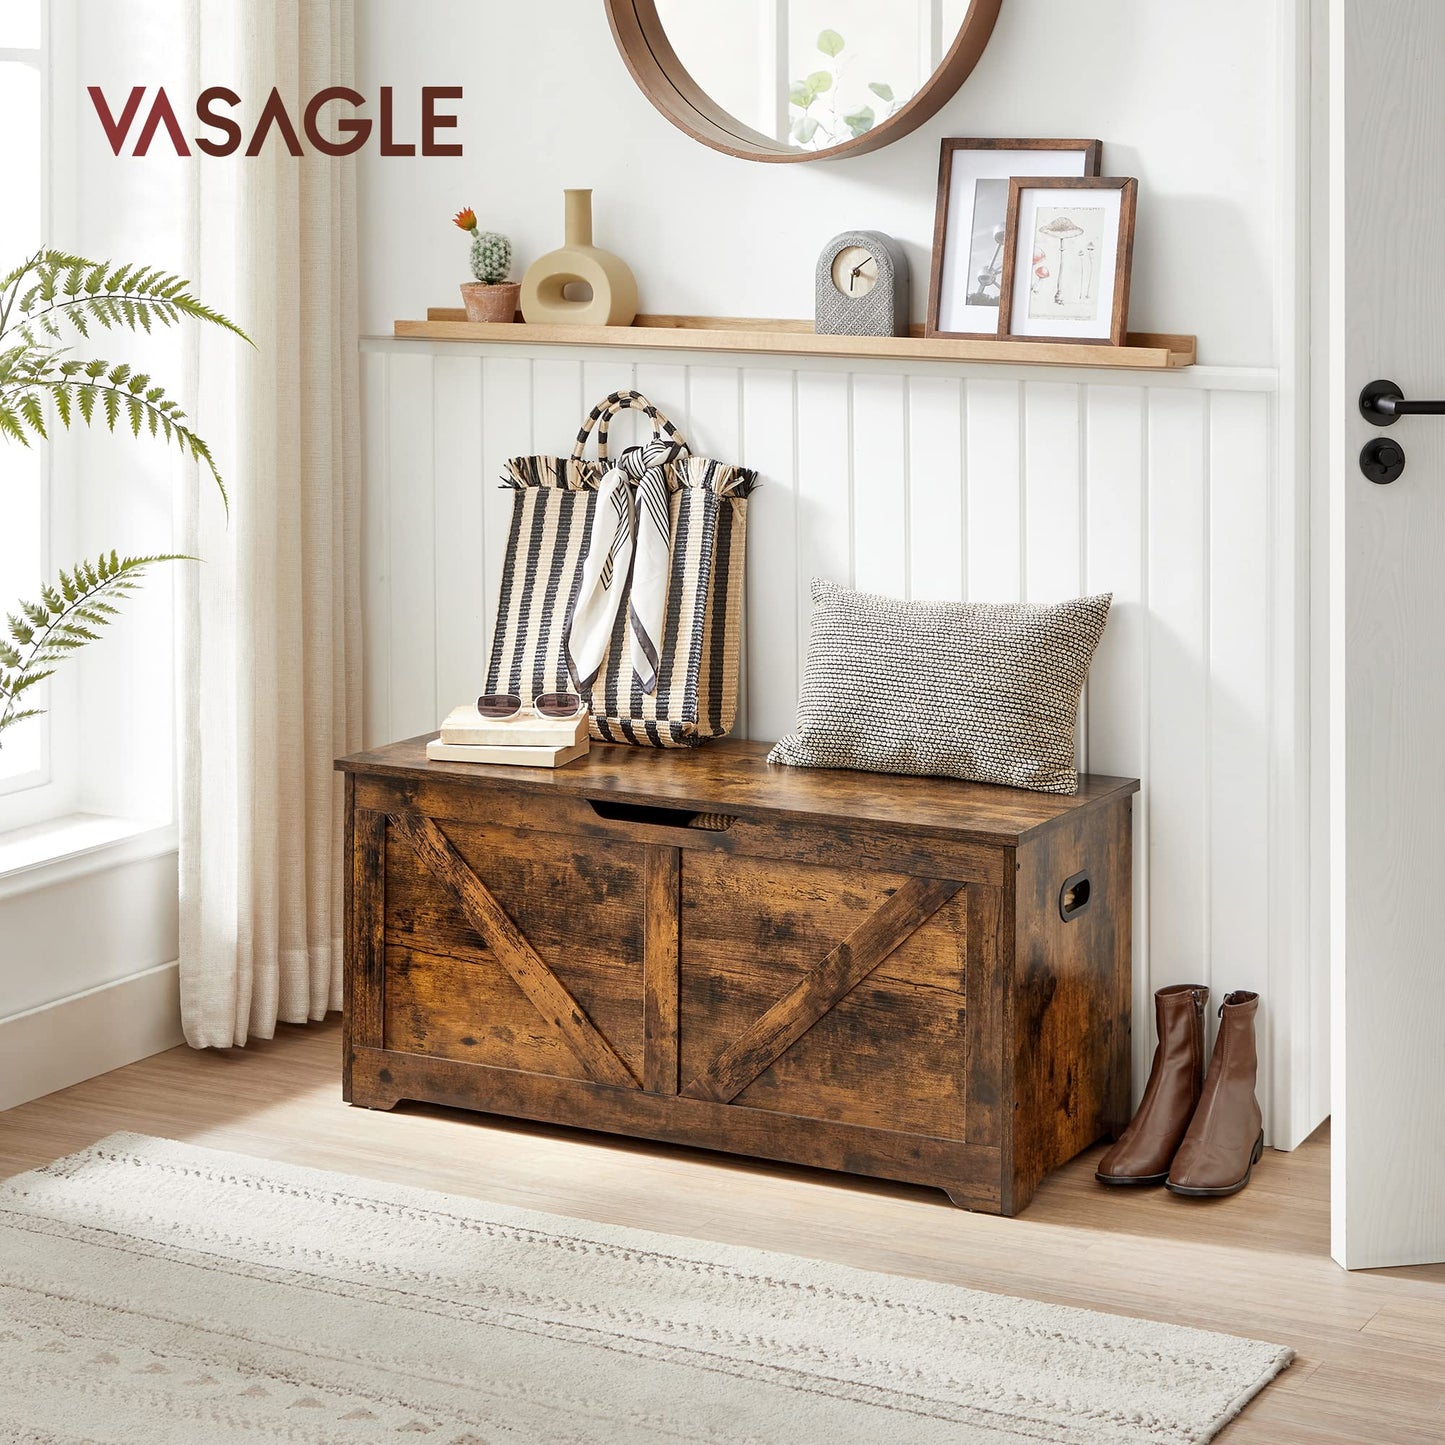 VASAGLE Storage Chest, Storage Trunk with 2 Safety Hinges, Storage Bench, Shoe Bench, Barn Style, 15.7 x 39.4 x 18.1 Inches, for Entryway, Bedroom, Living Room, Rustic Brown ULSB060T01